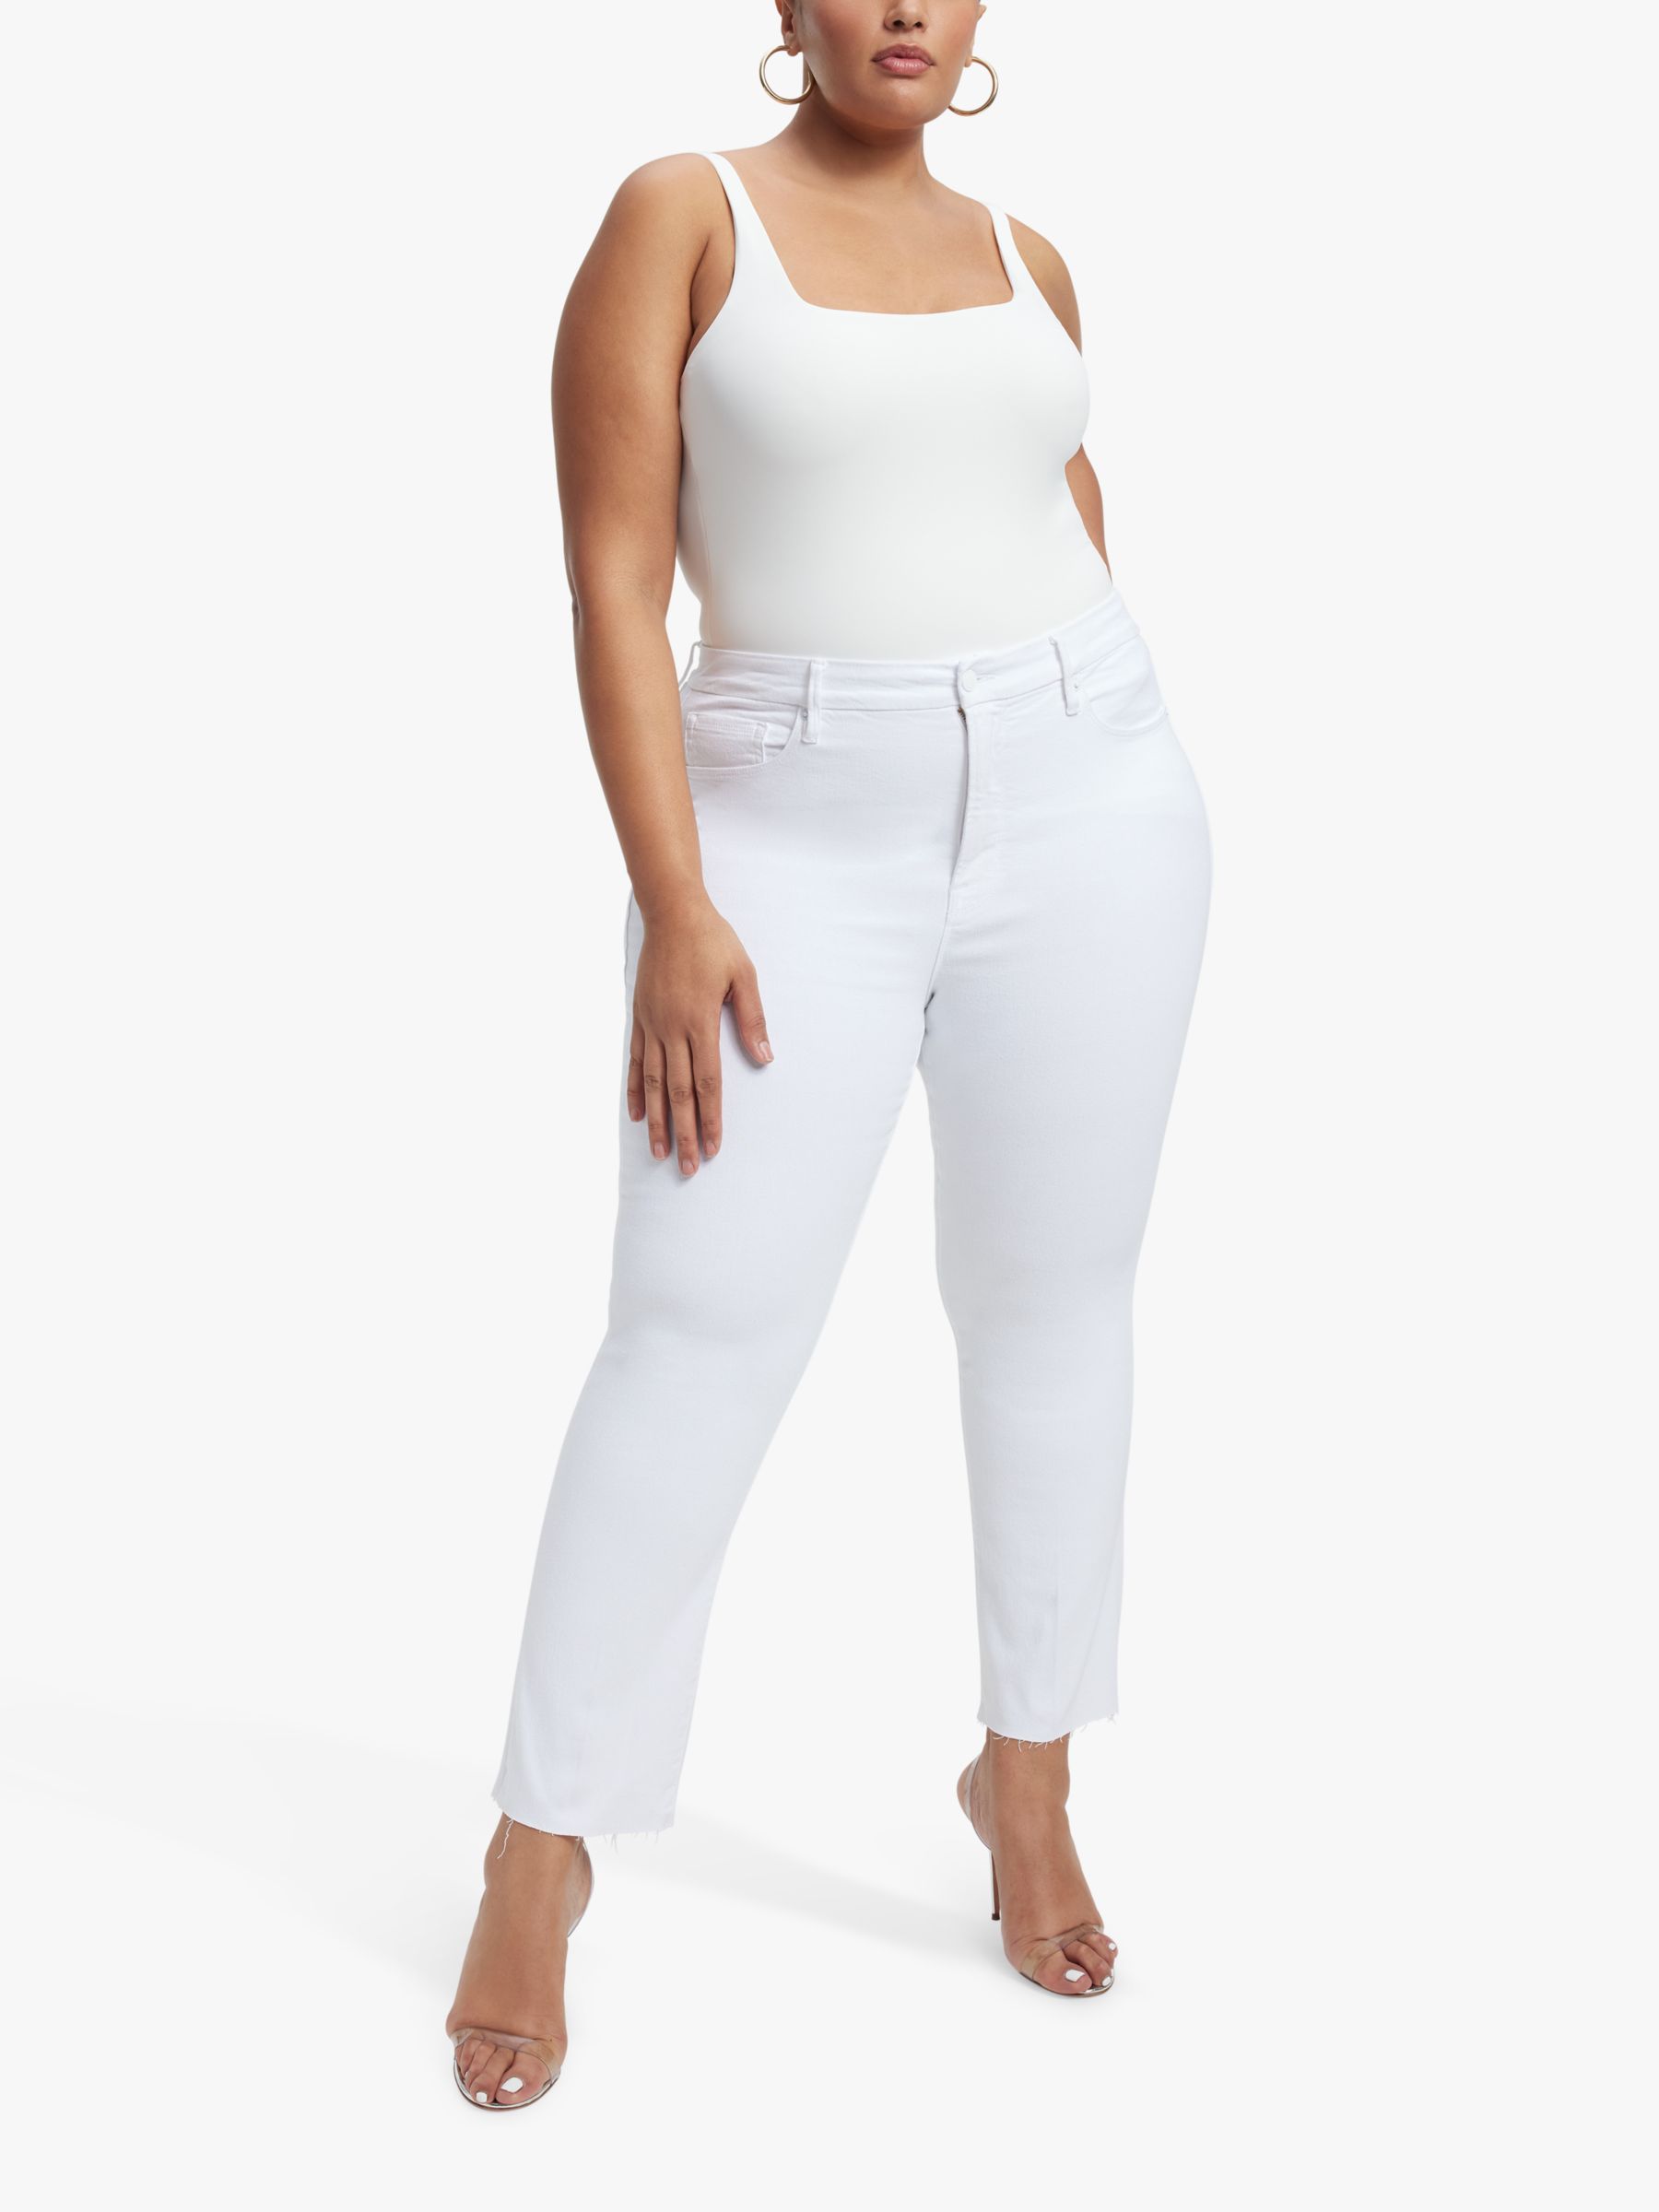 Buy Good American Good Straight Cut Raw Jeans, White Online at johnlewis.com